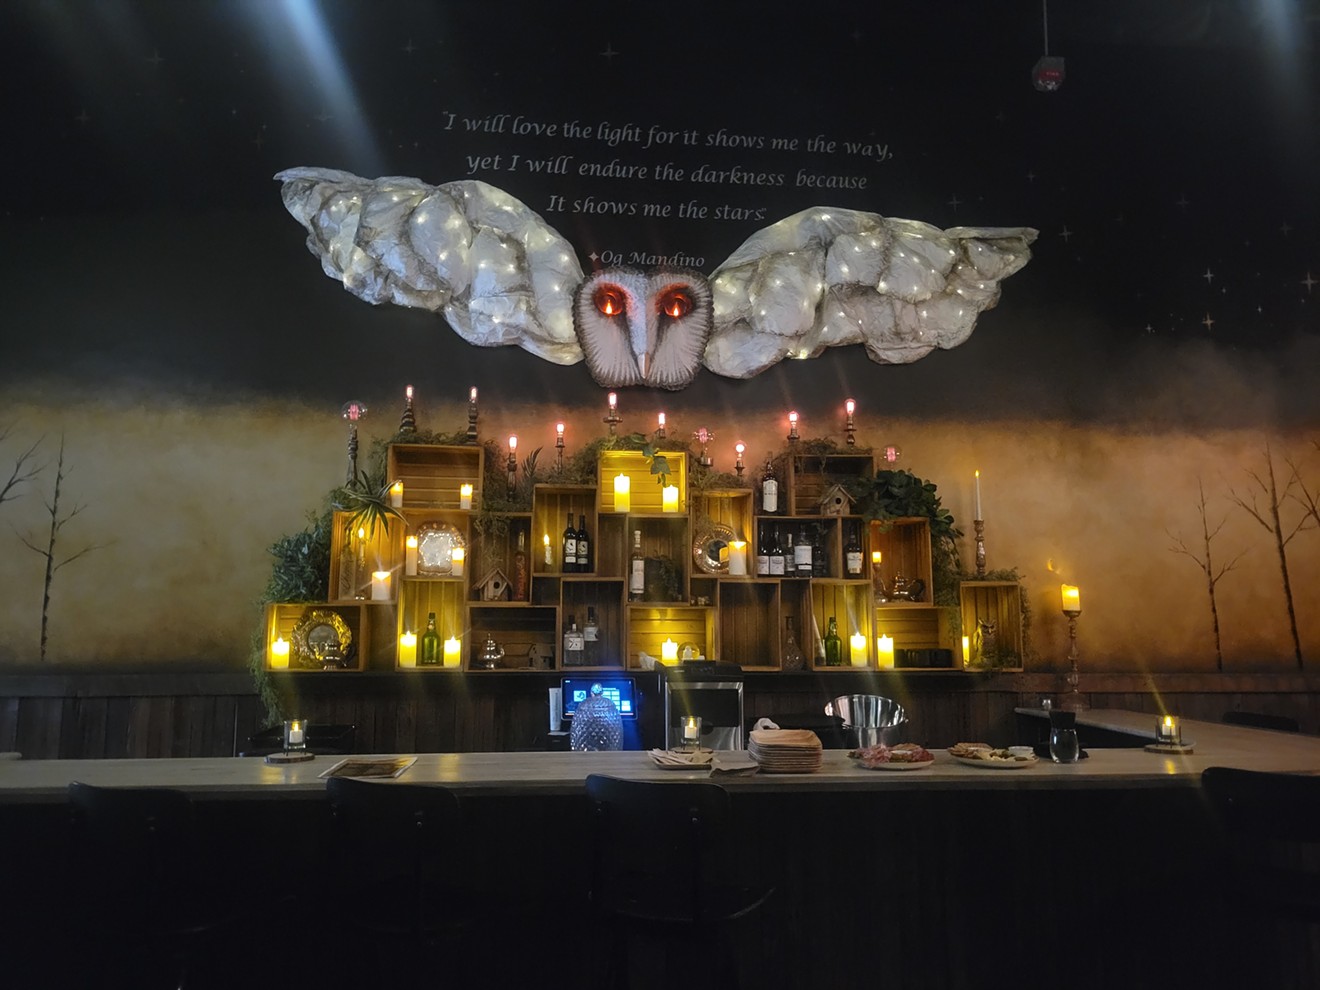 The back bar features a spectacular owl.